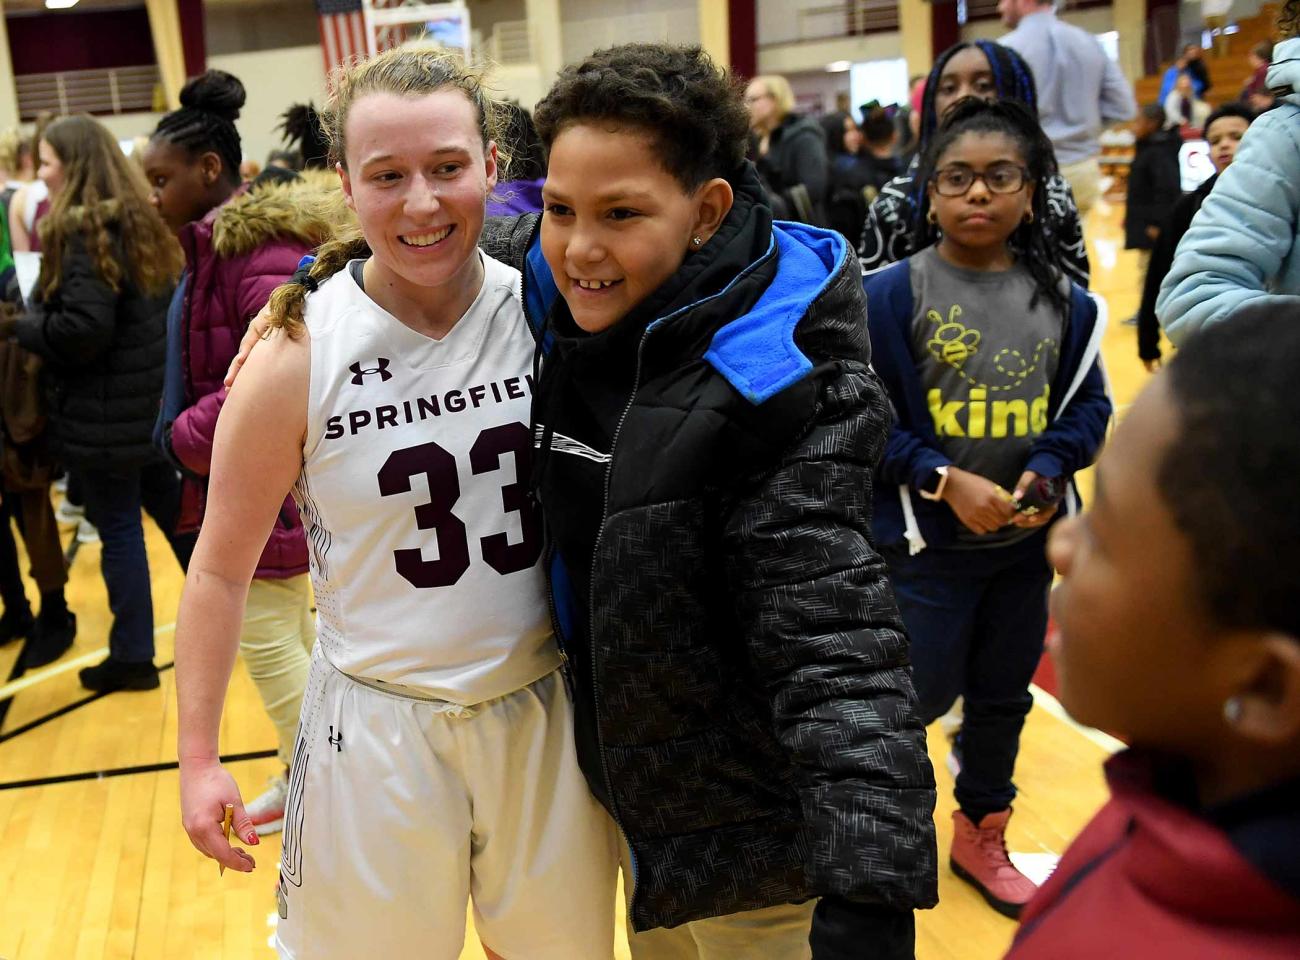 The Springfield College Division of Inclusion and Community Engagement, along with Springfield College Athletics, welcomed more than 250 students from Elias Brookings, William N. DeBerry, and Walsh Elementary Schools on Tuesday, Jan. 7 at Blake Arena when the Pride hosted Smith College.